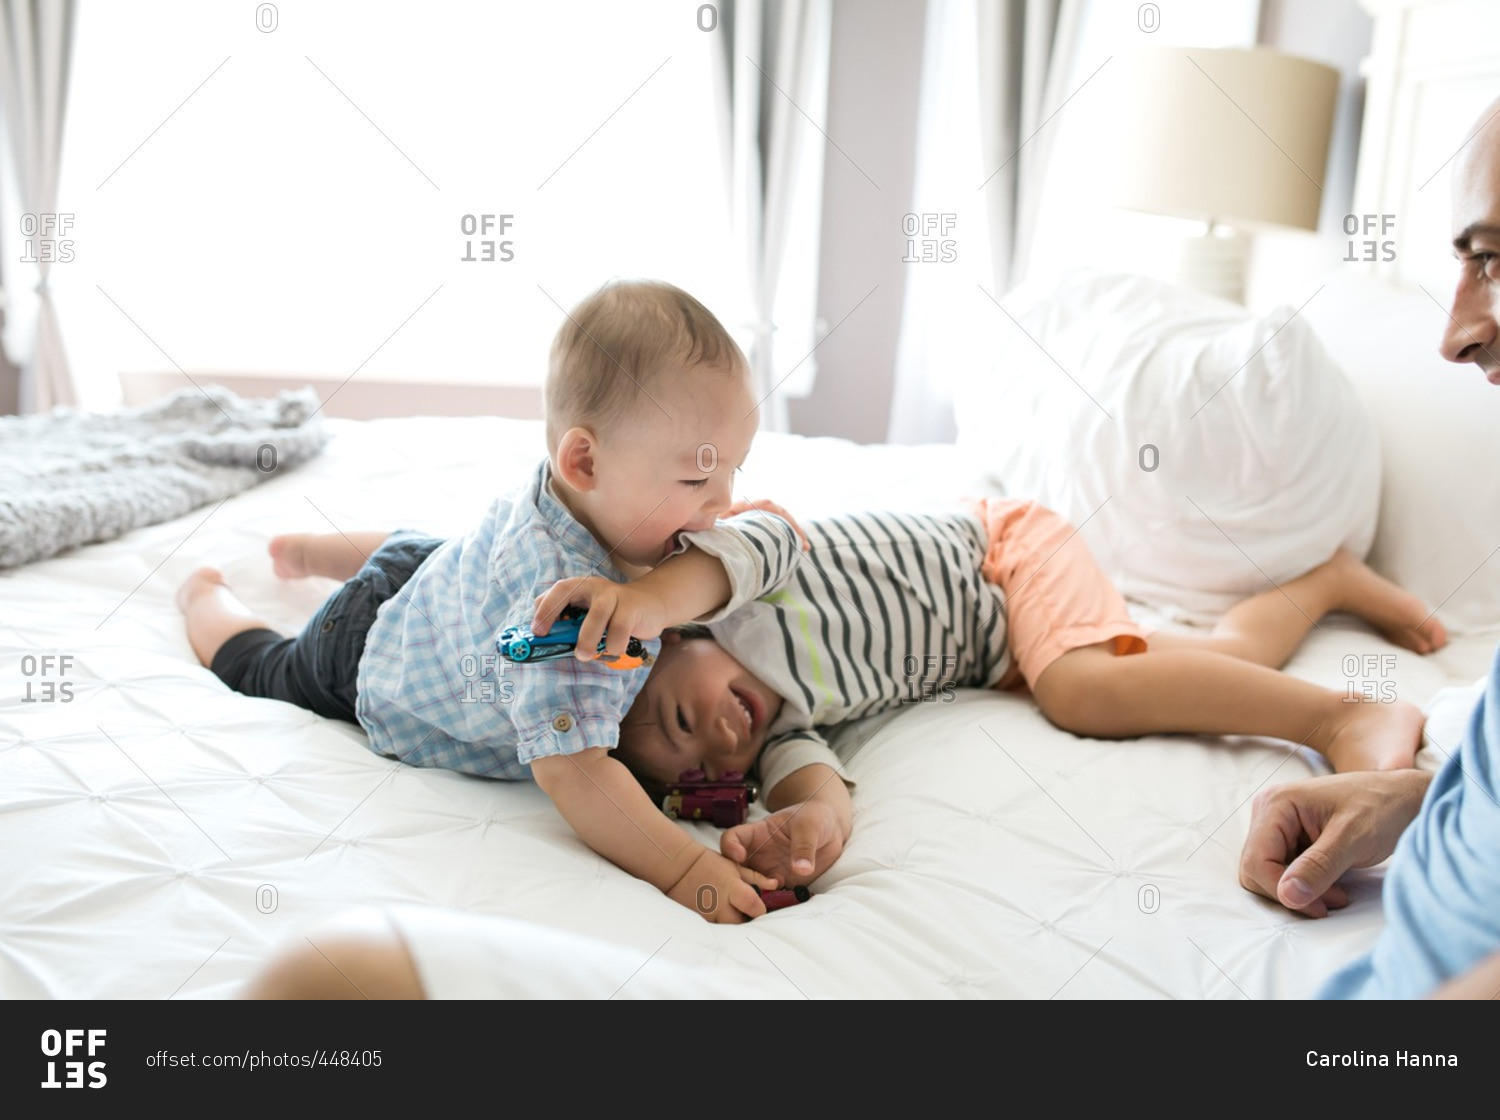 Brothers wrestling together on a bed